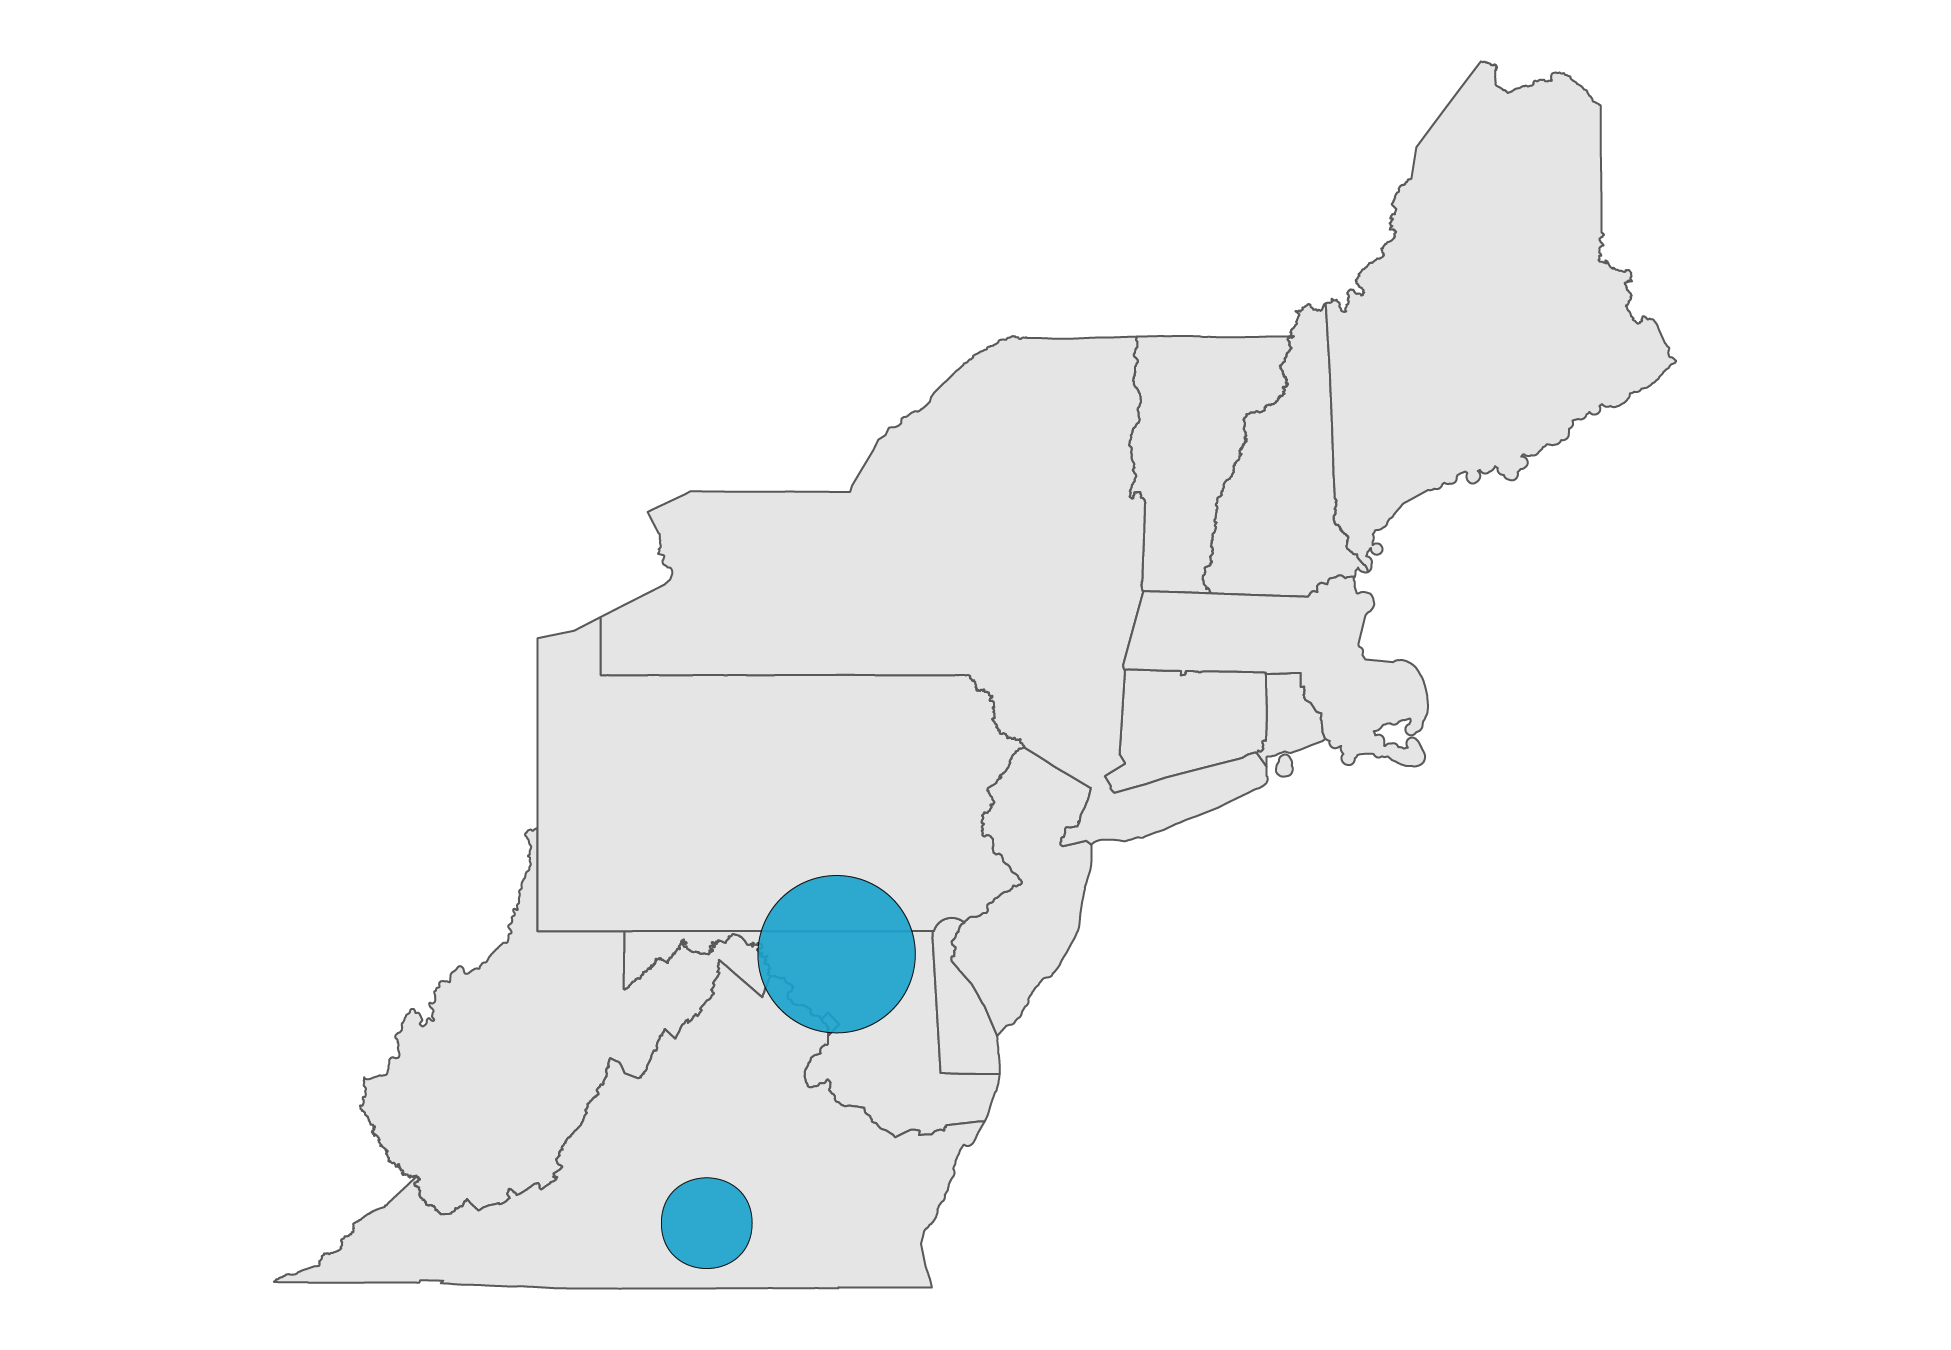 A map of the Northeast region of the United States. There are blue circles over Virginia and Maryland. The size of the circles represents the size of the property tax revenue gap between Black and White students in that state. Virginia has the smaller circle, representing a gap of $1,294. Maryland has a gap of $2,173.